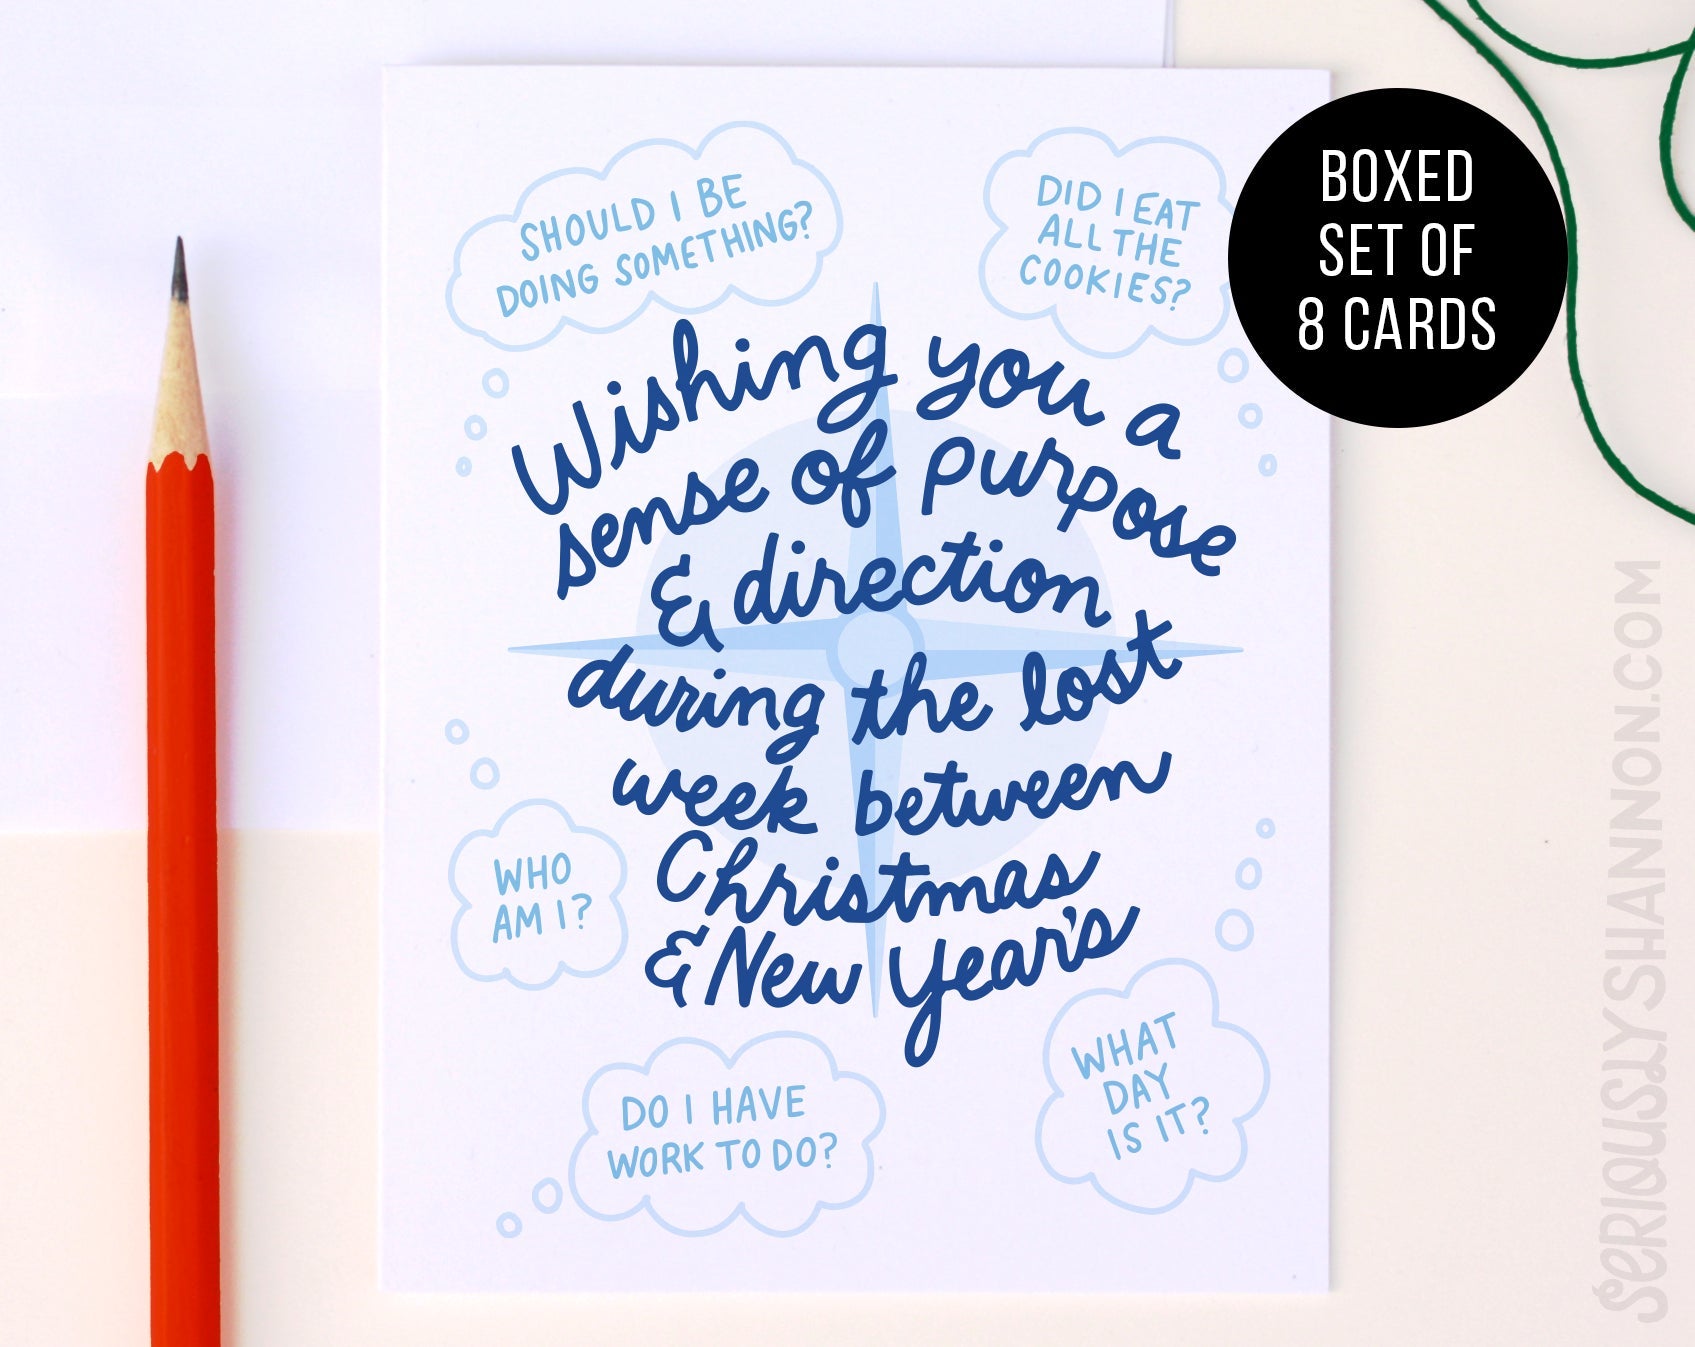 Purpose and Direction New Year's Cards Set of 8